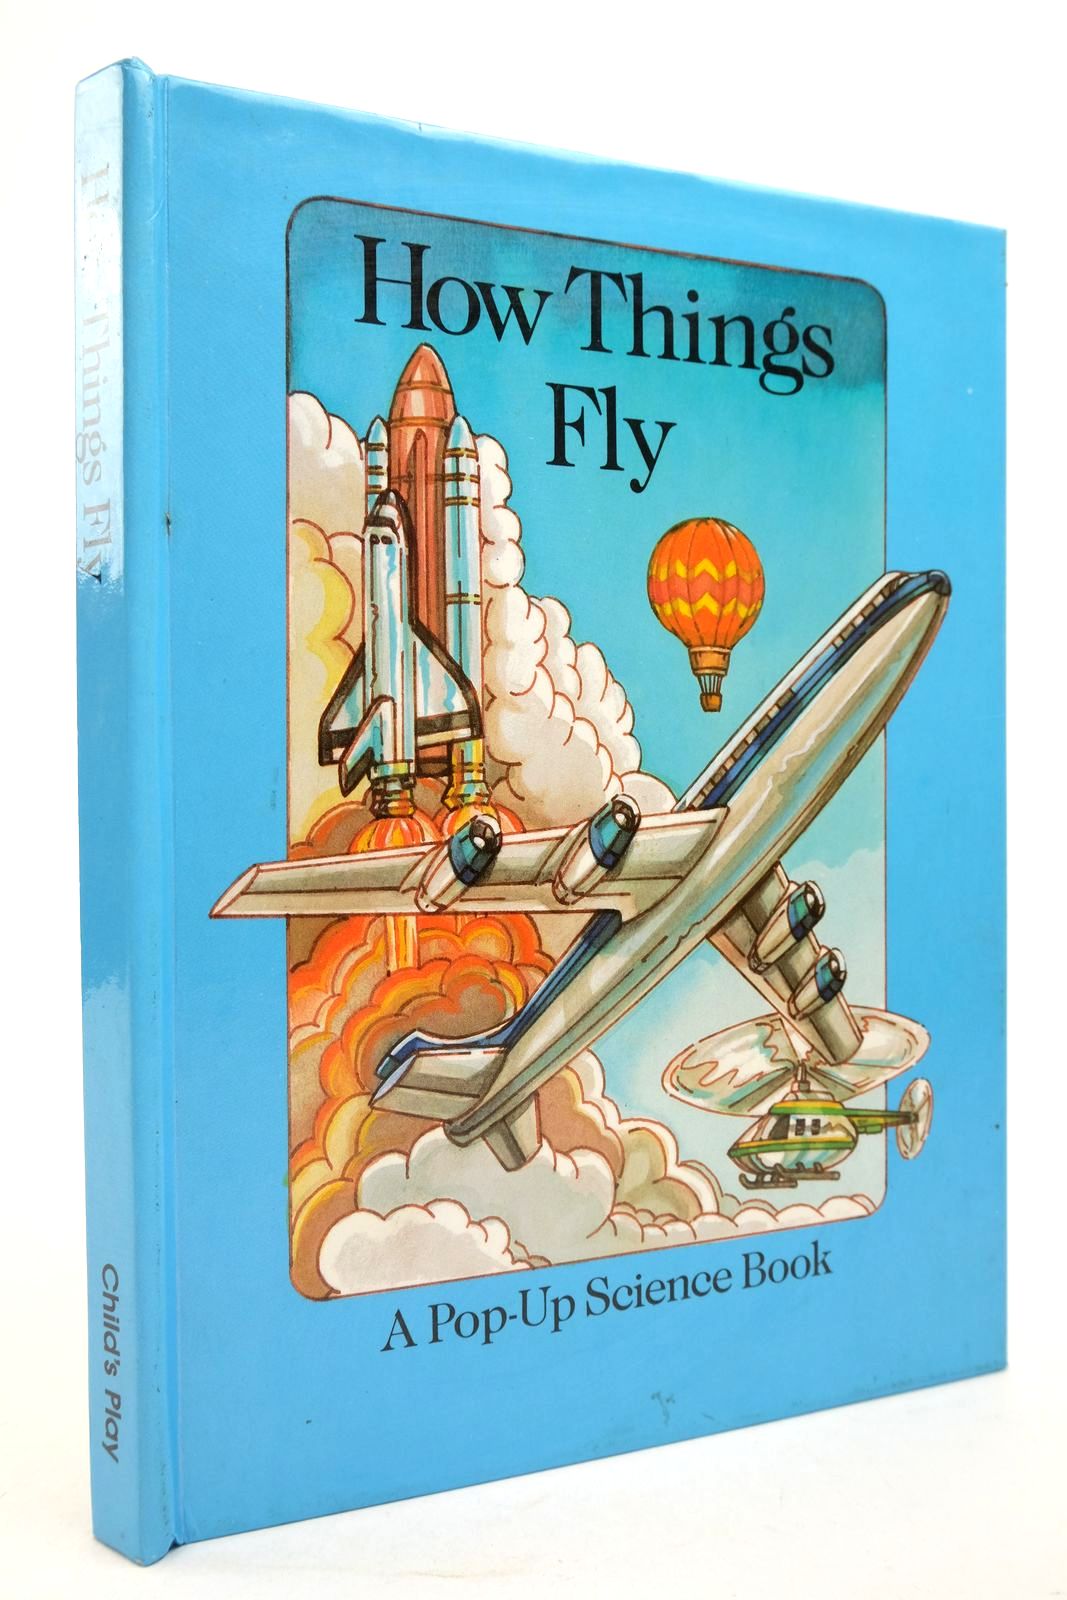 Photo of HOW THINGS FLY published by Child's Play (International) Ltd. (STOCK CODE: 2140846)  for sale by Stella & Rose's Books